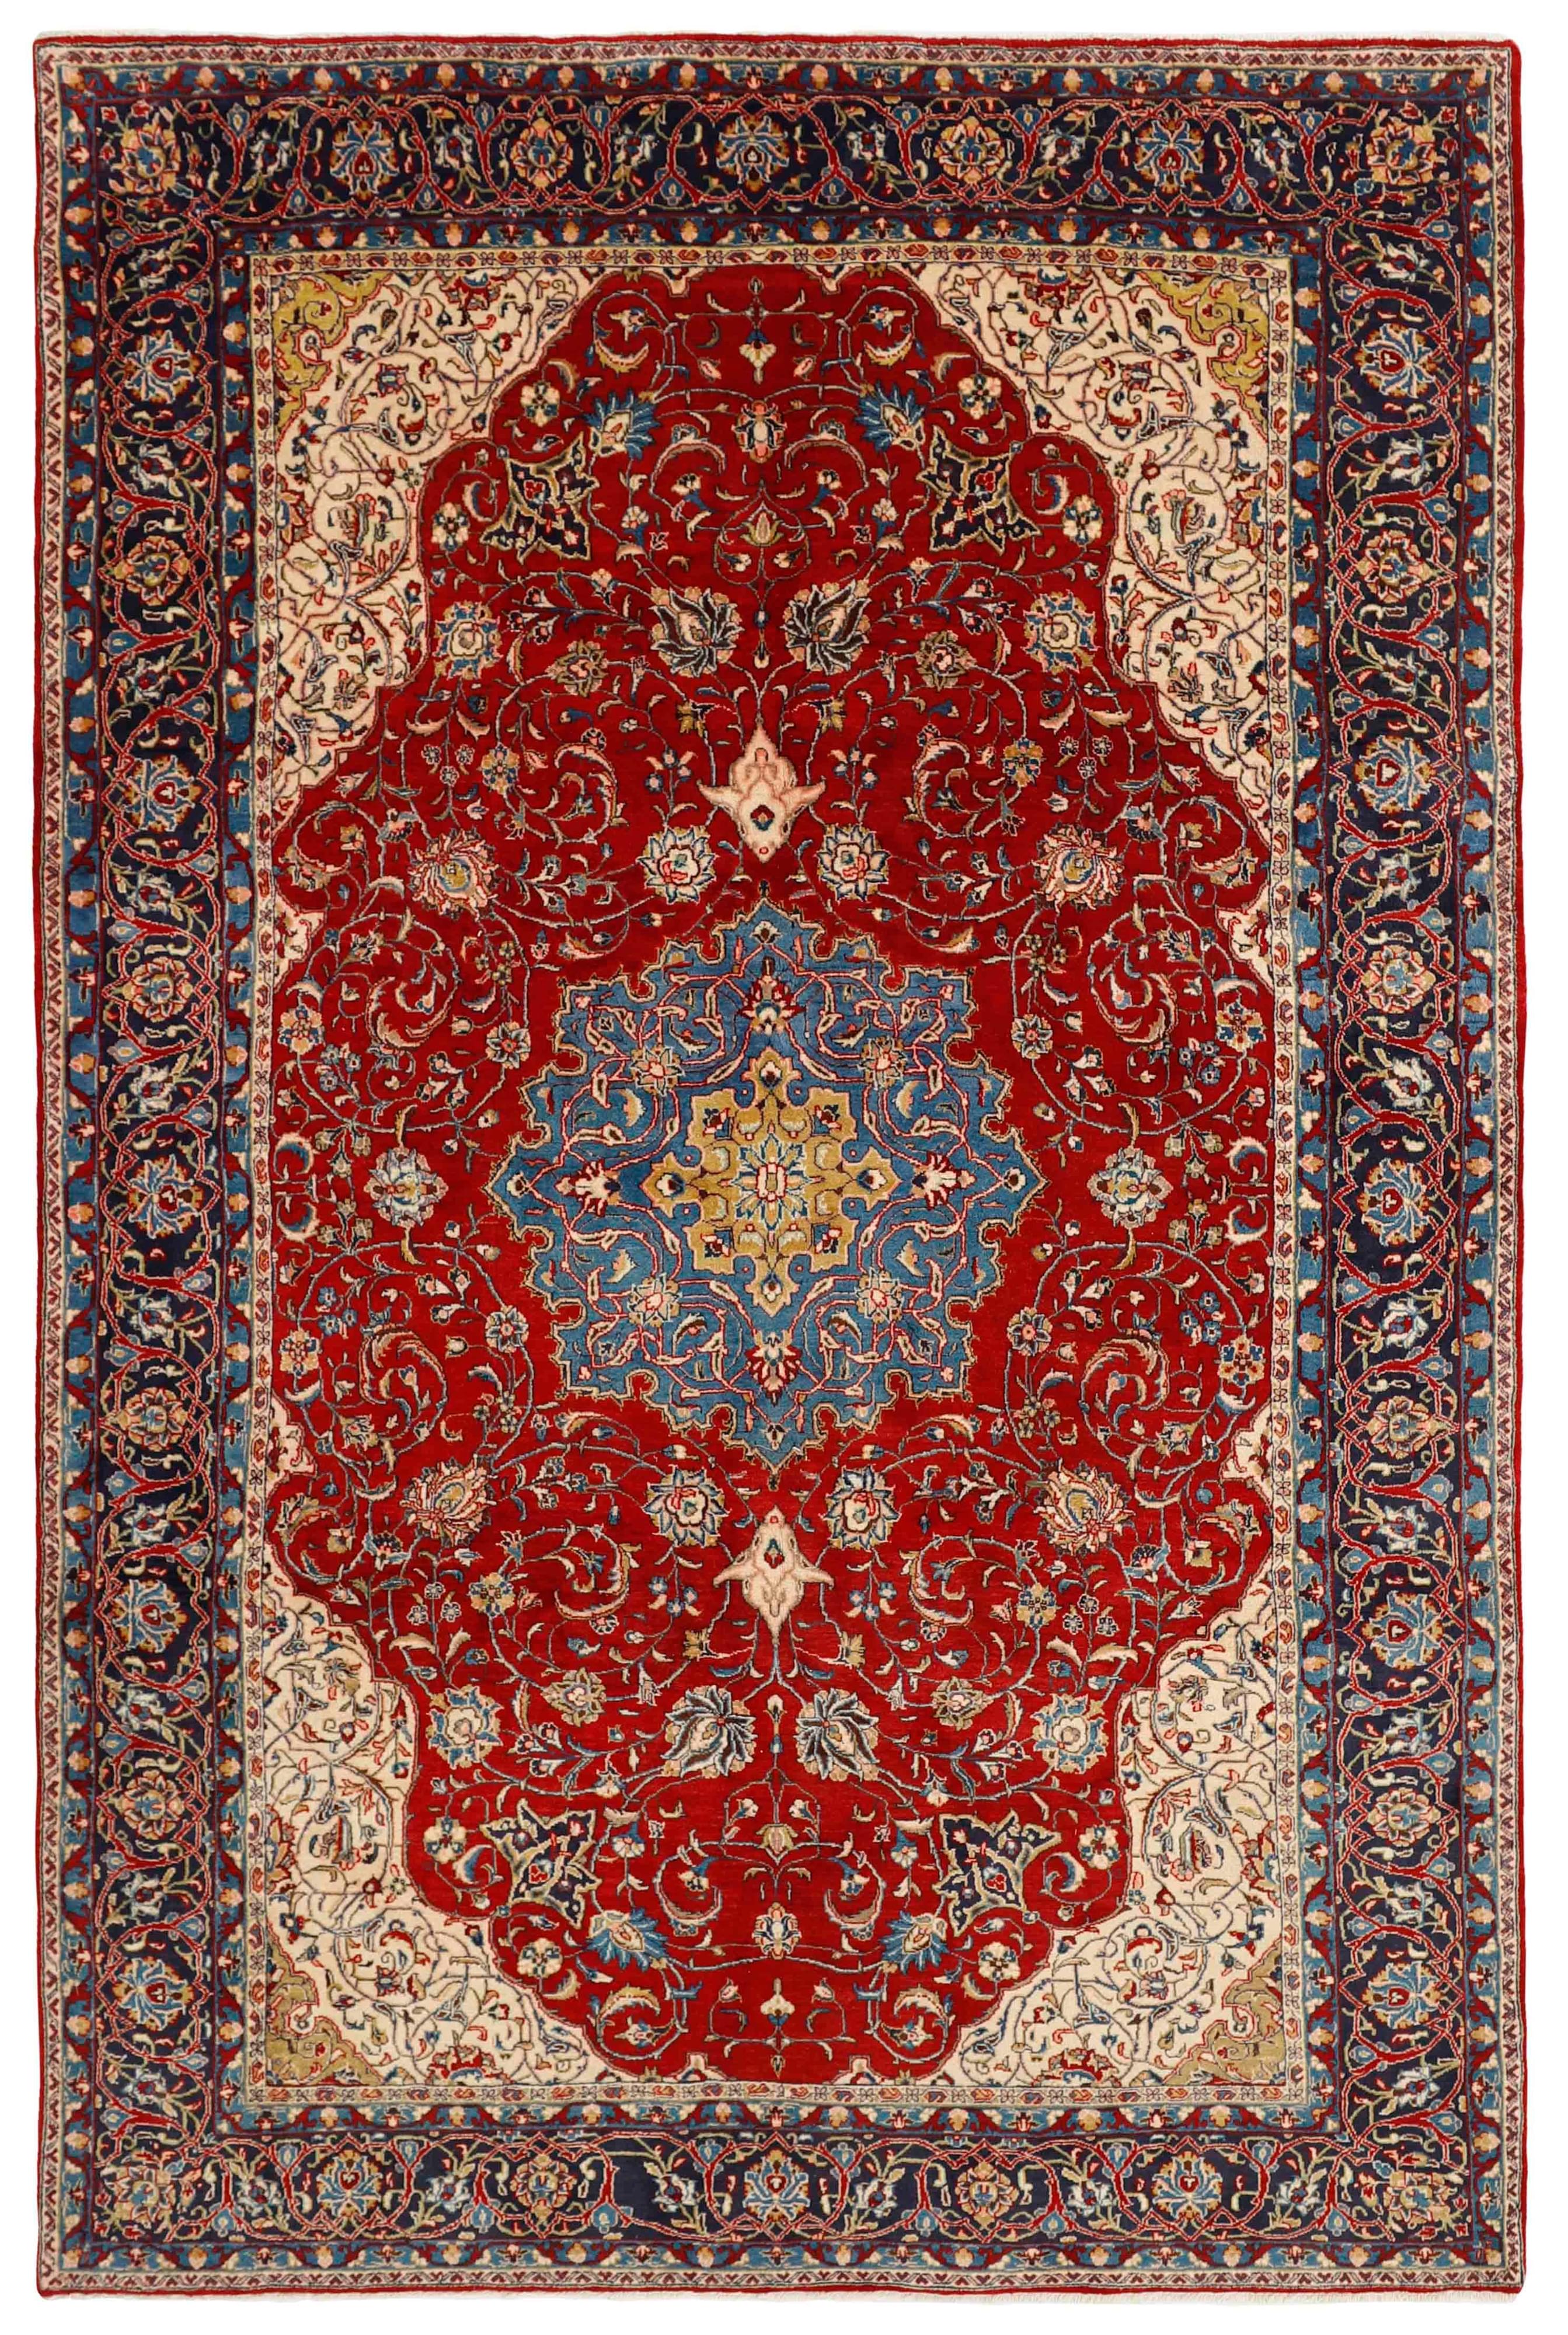 Large authentic persian rug with traditional floral pattern in red, blue, green, beige and brown